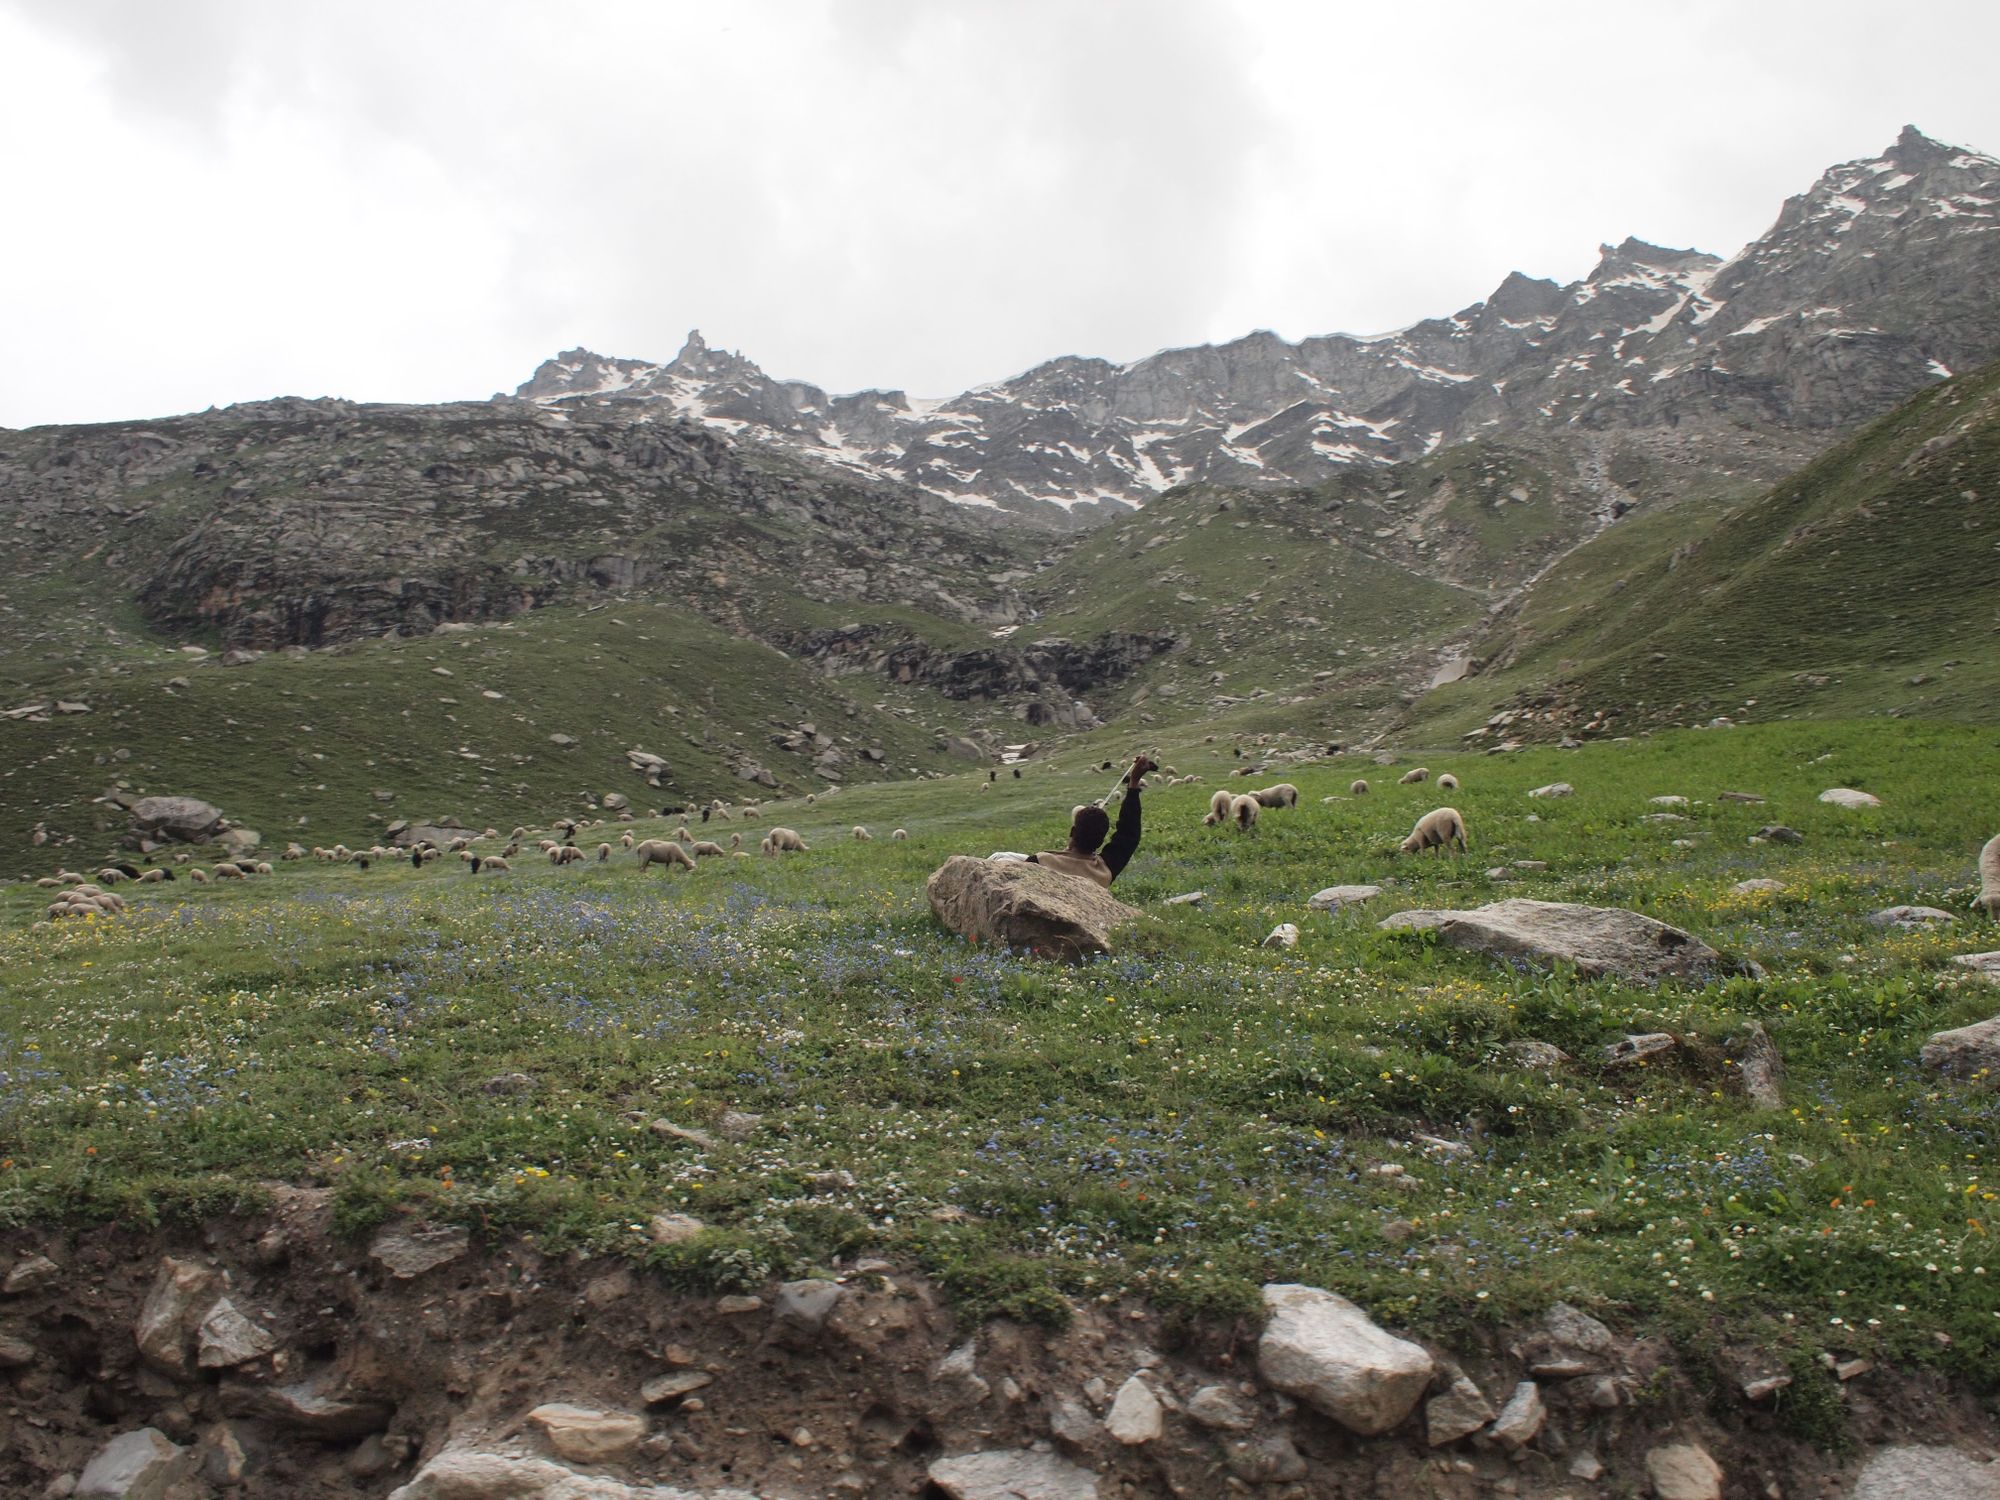 A man leans against a rock, his back to the camera as he spins wool. He is in the Himalaya mountains with a flower covered meadow with sheep and snowcapped peaks. 